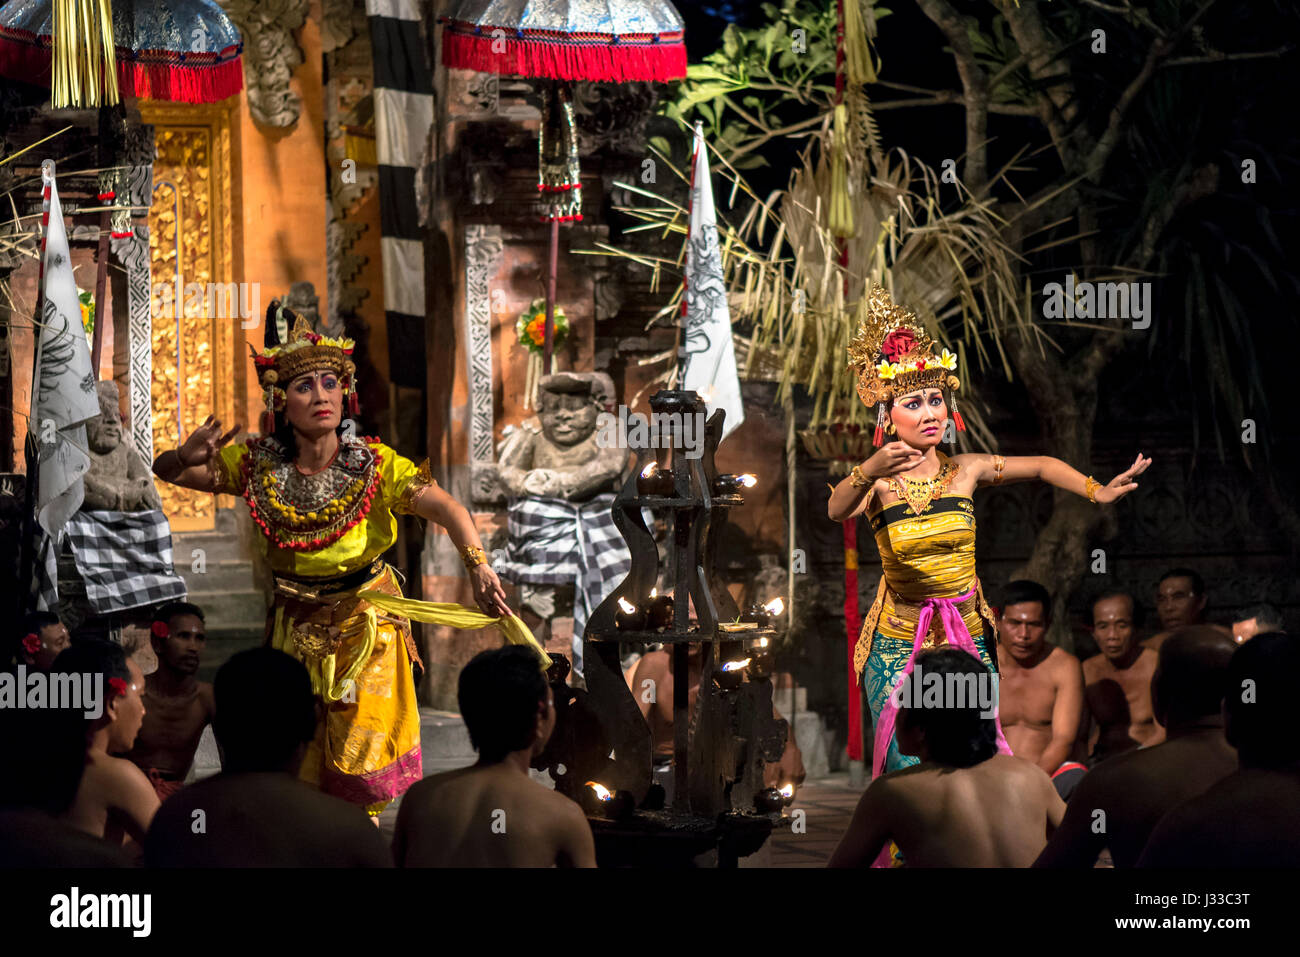 Traditional Balinese Dance Performance in traditional robes and dresses, Bali, Indonesia Stock Photo